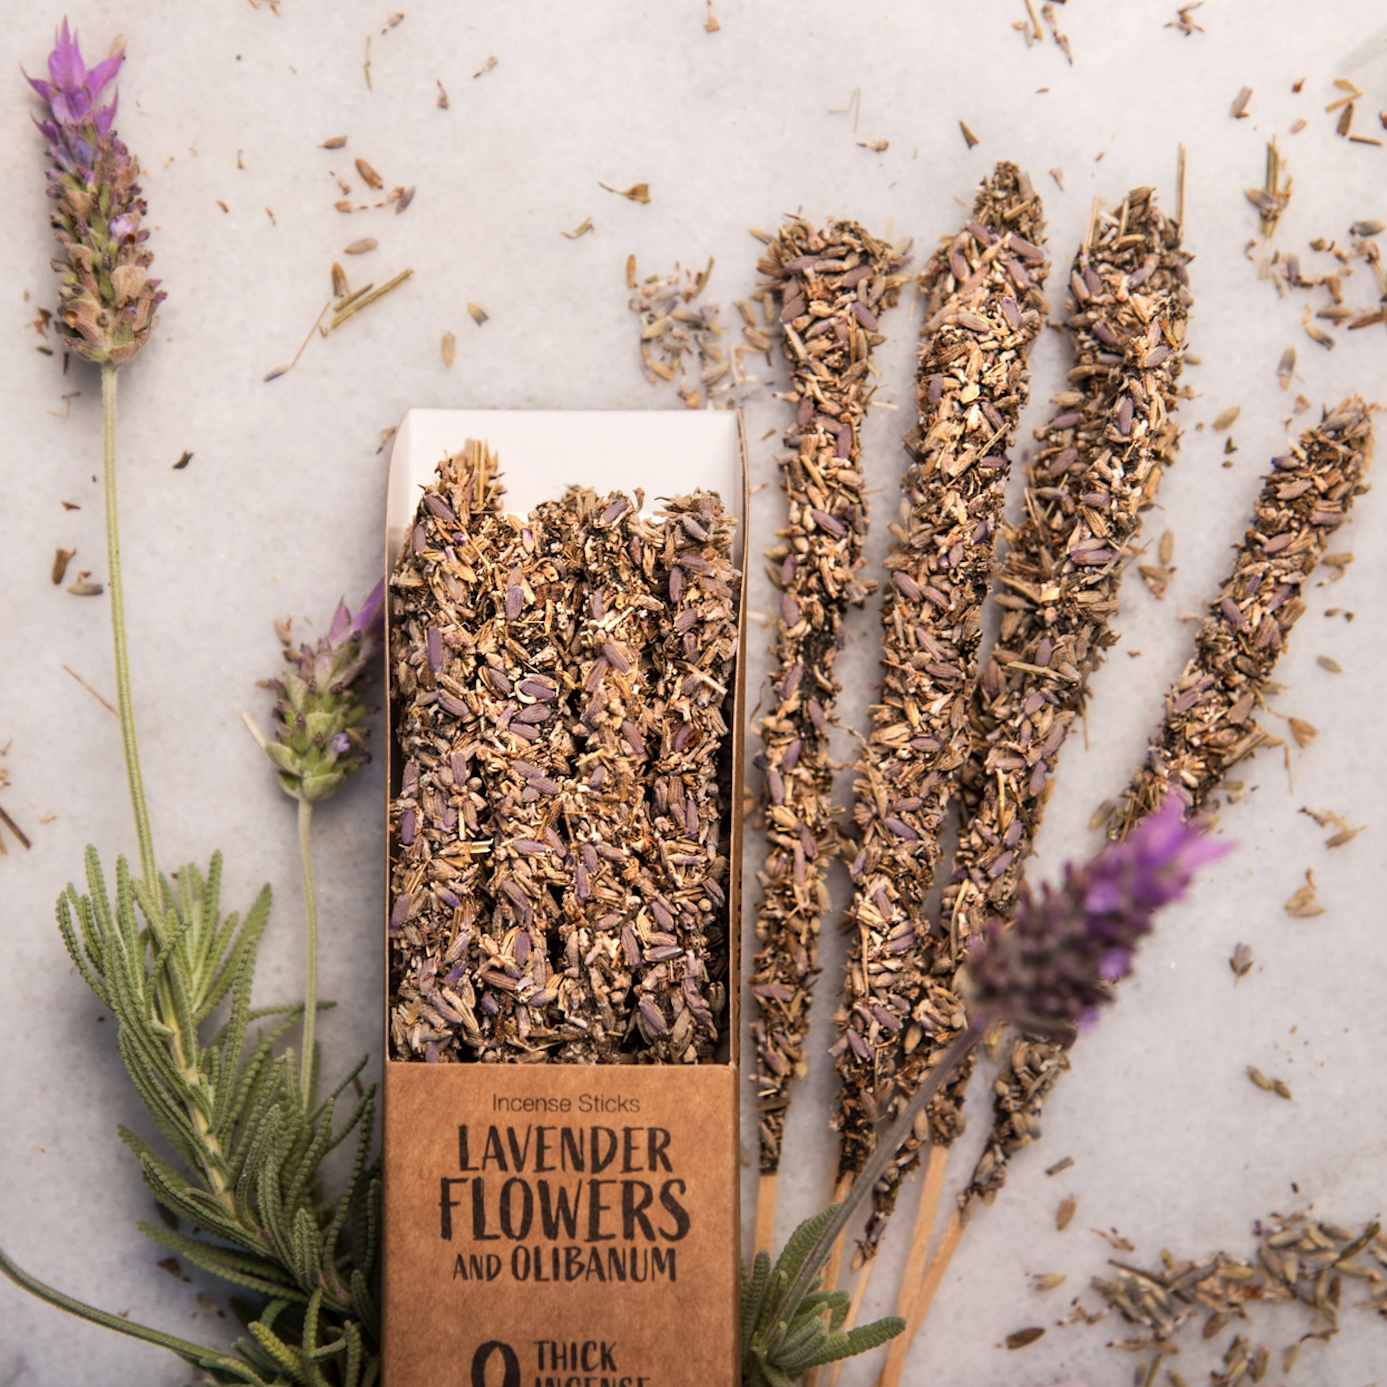 Lavender and Olibanum Incense Sticks. Each stick is hand formed around an Olibanum (Frankincense) resin base then carefully packed with whole flowers, herbs and/or petals. Leaving a gorgeously decorated incense stick that is as impressive to see as it is to smell.